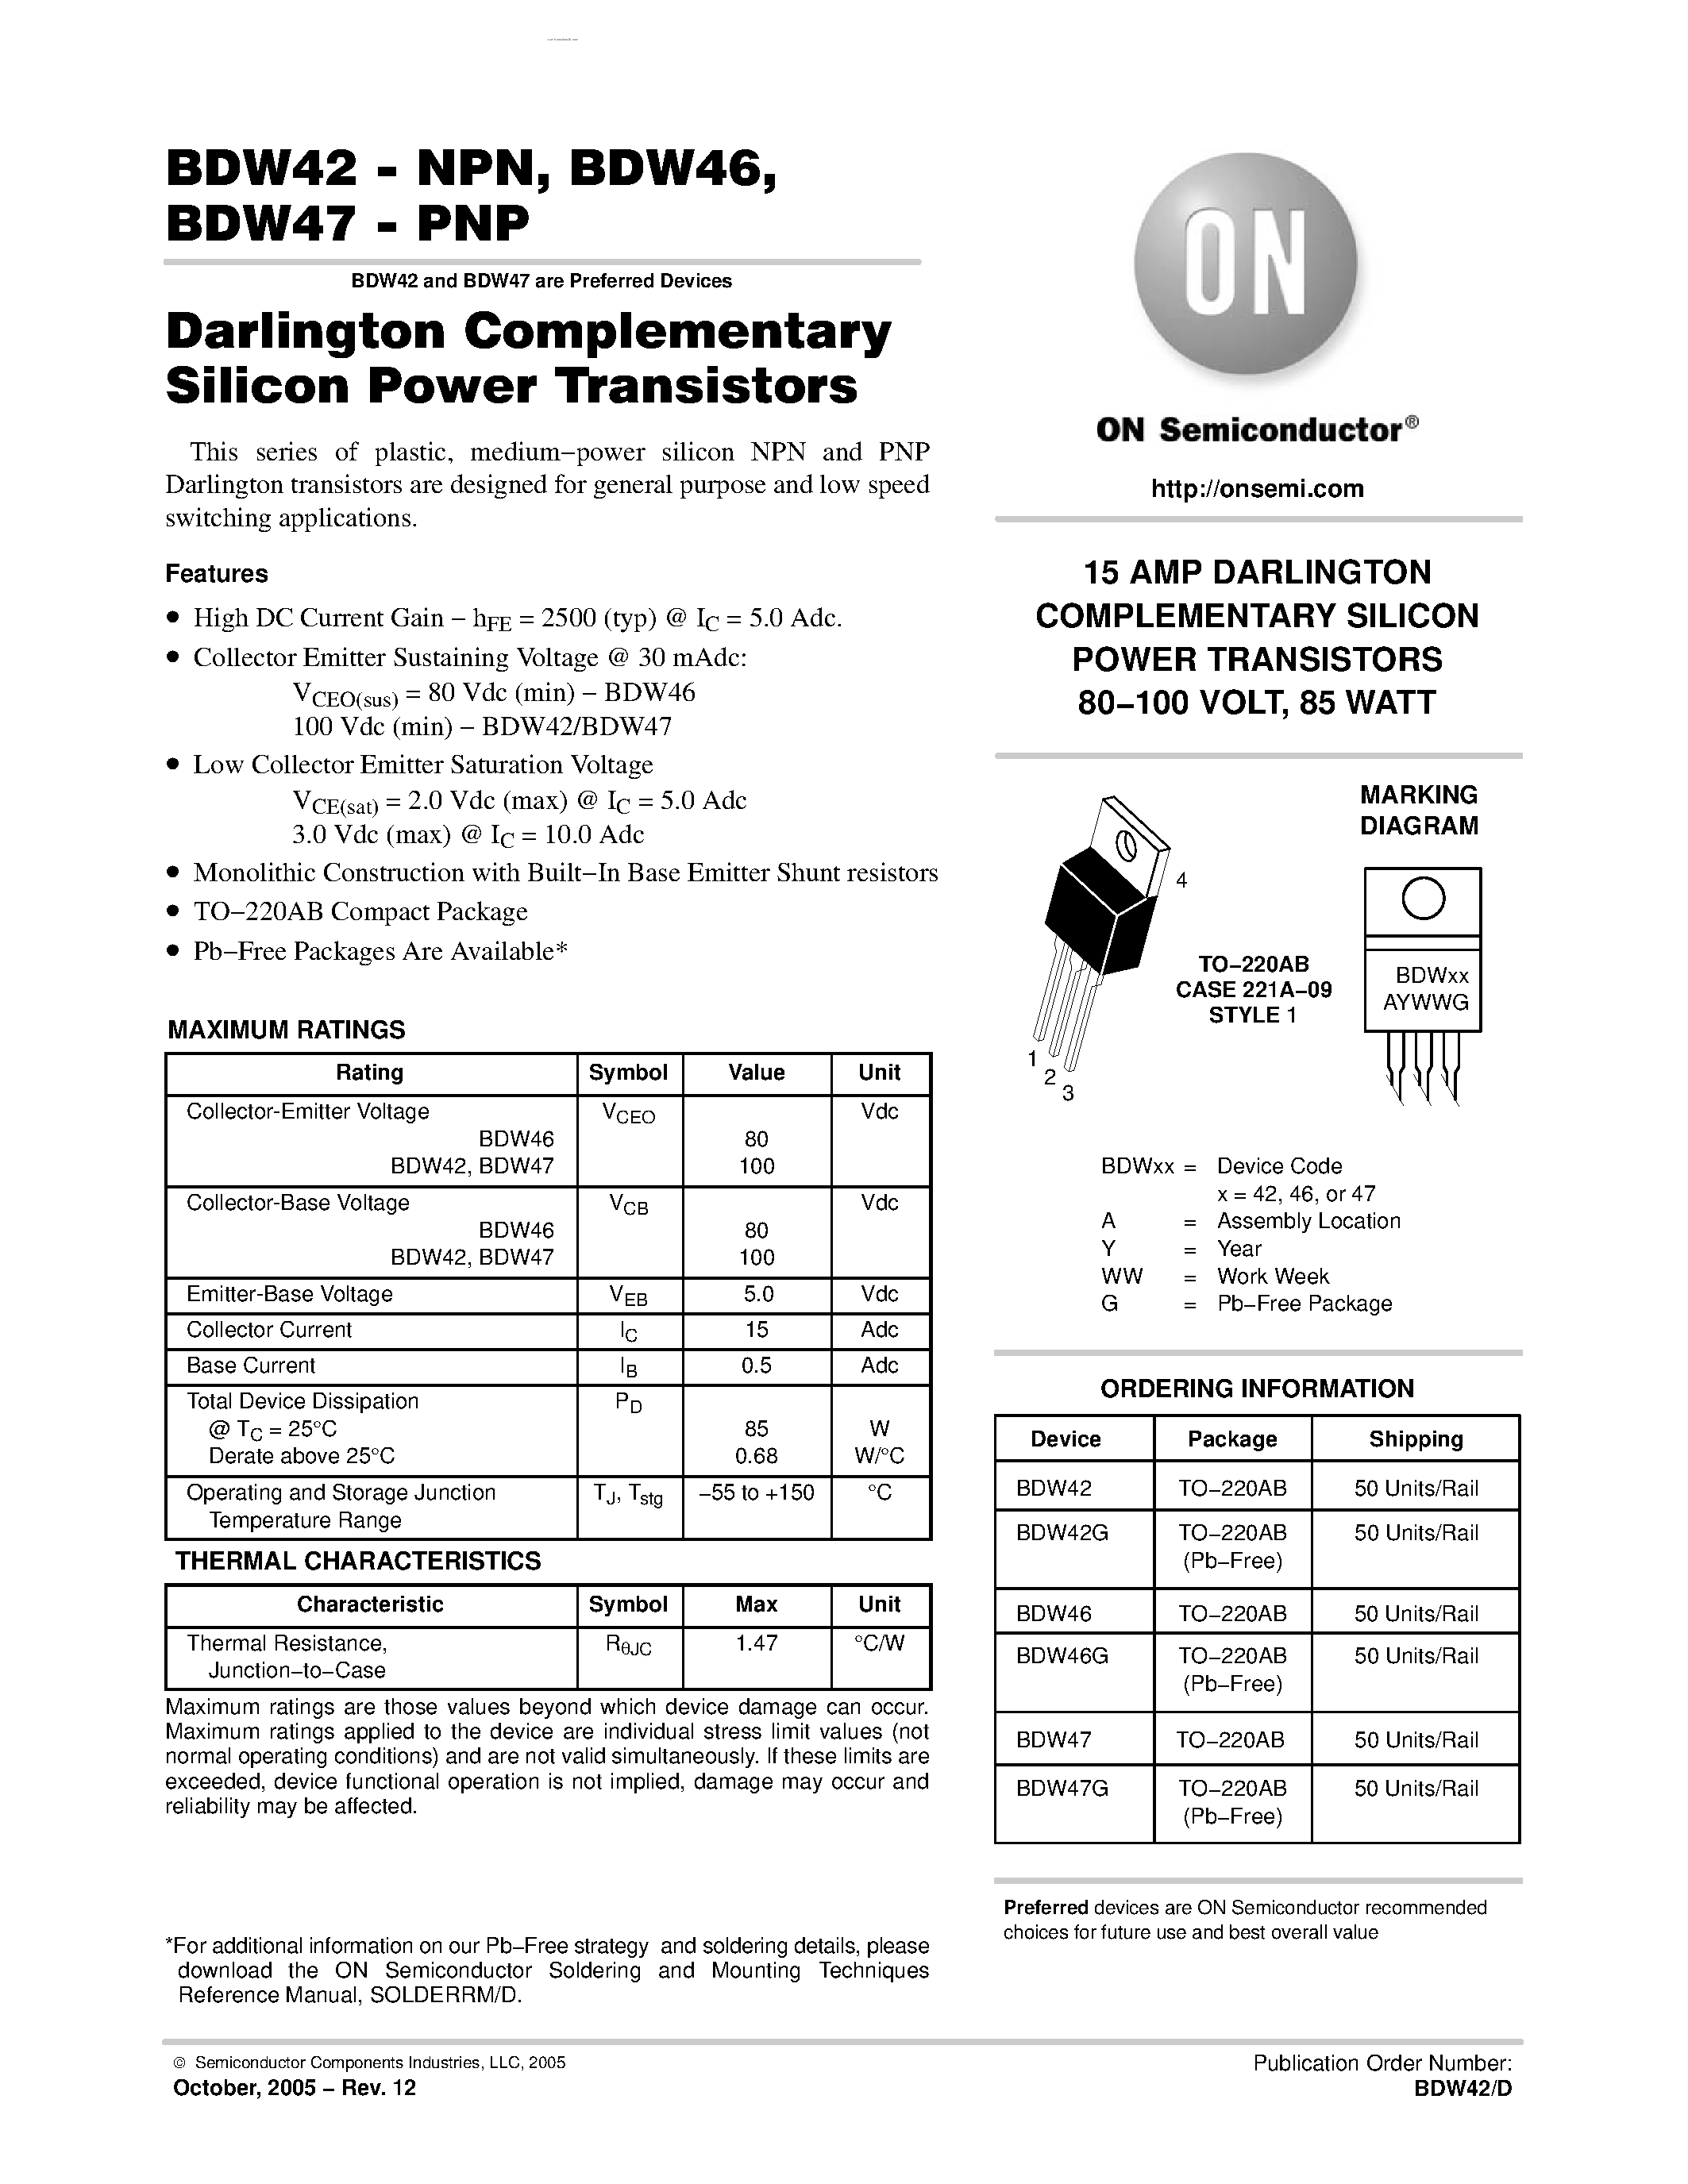 Даташит BDW47 - DARLINGTON COMPLEMENTARY SILICON POWER TRANSISTORS страница 1